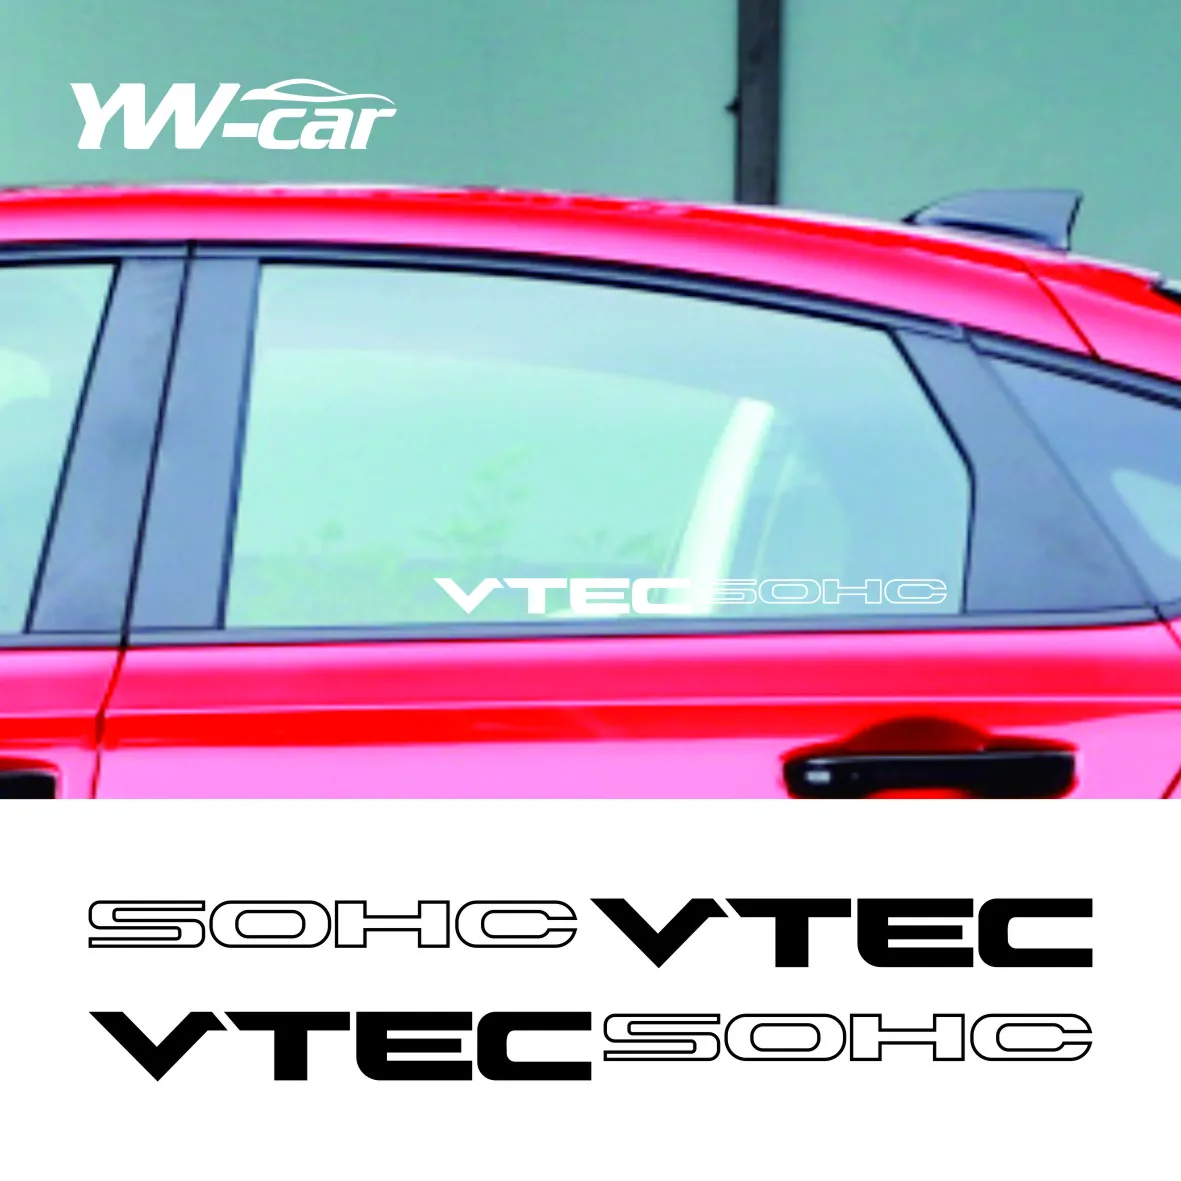 

1 Pair SOHC VTEC Vinyl Stickers Decals Automobiles Car Styling For Honda Civic Si Accord JDM Typer Accessories